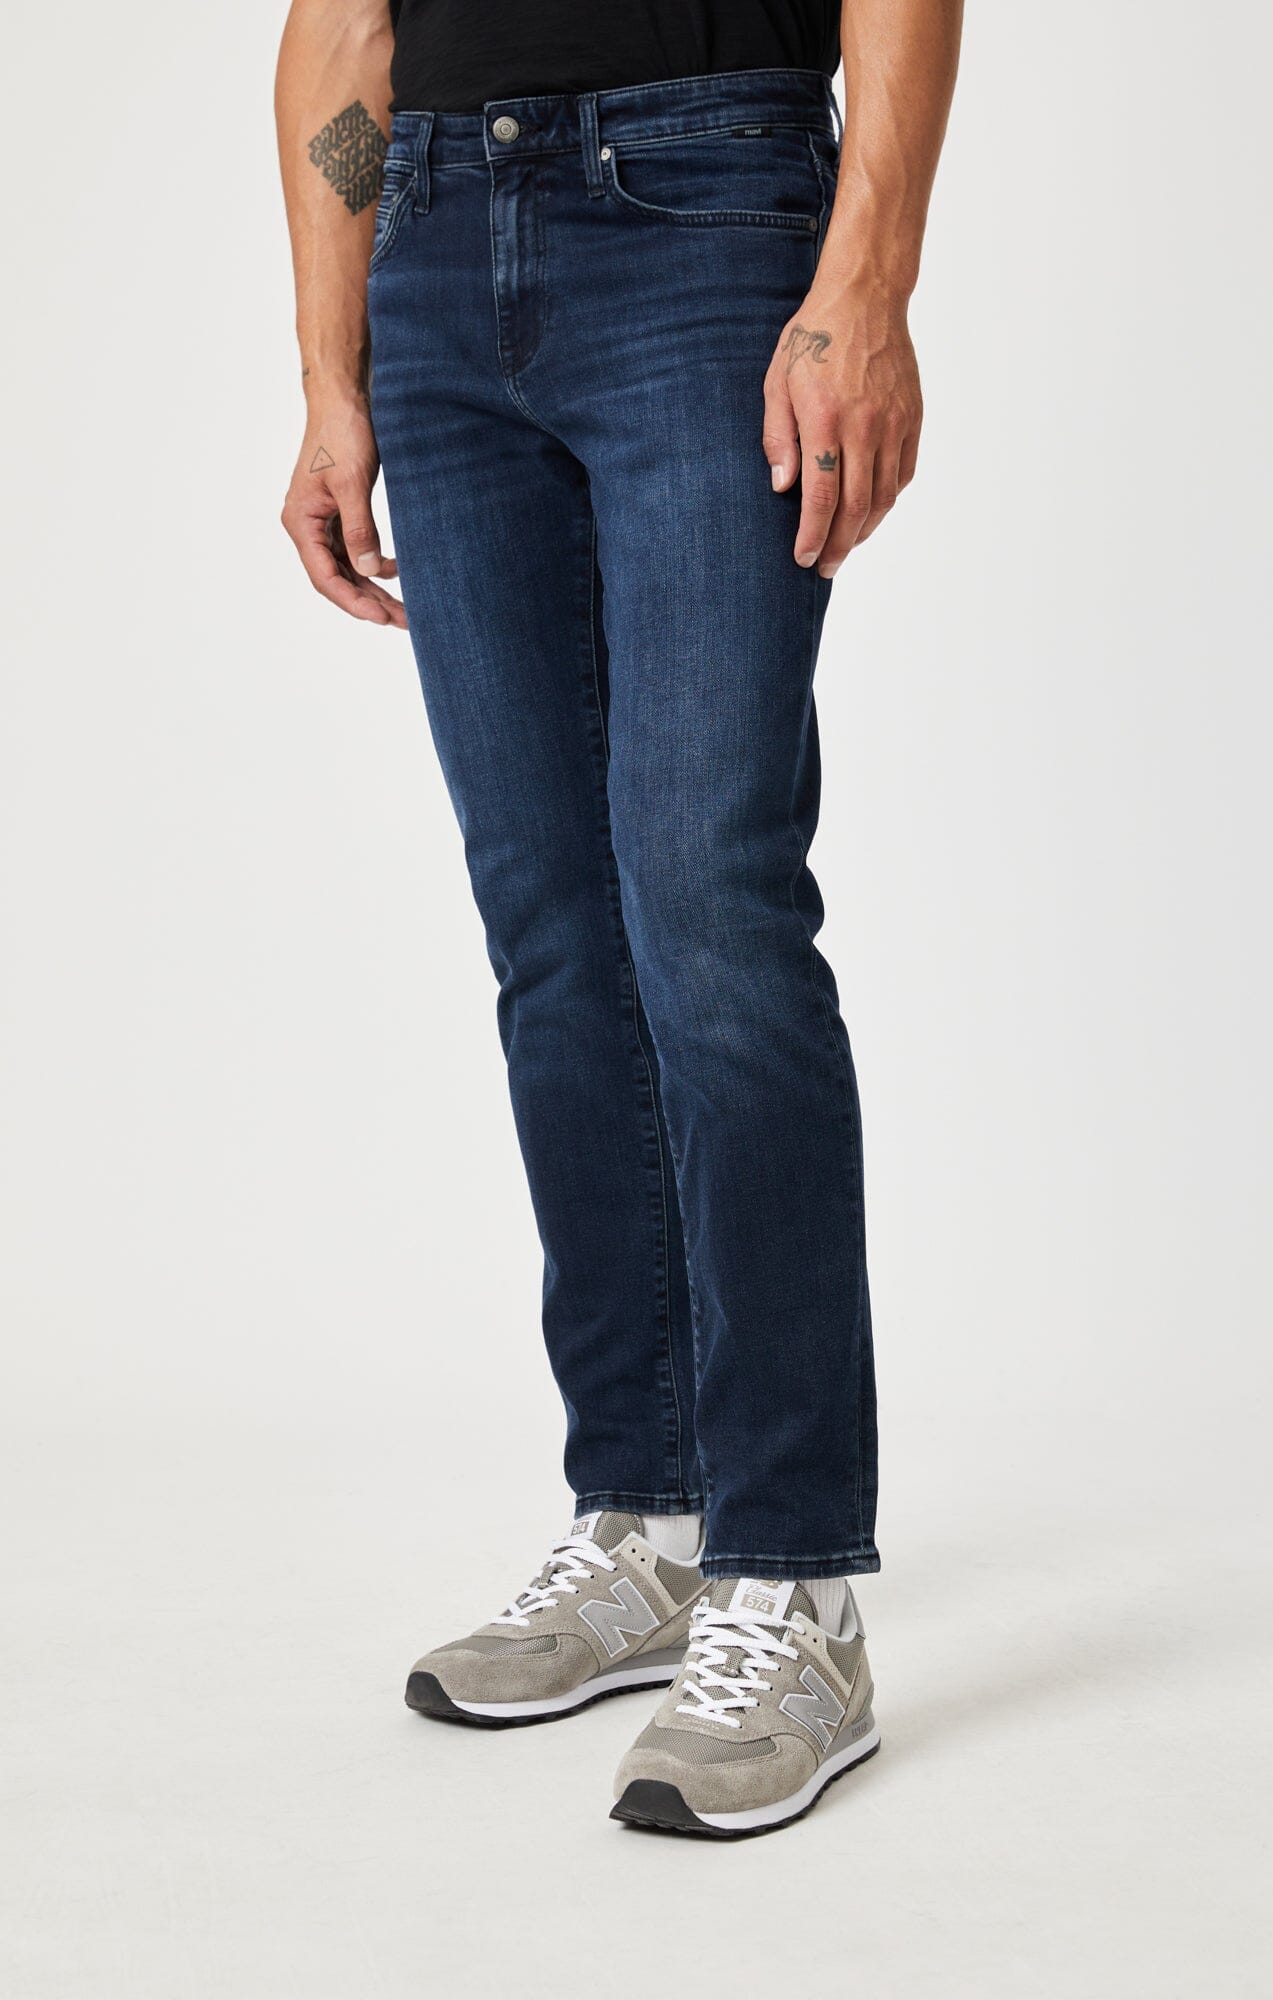 Straight Athletic Fit in Medium Wash ( Tall )  Athletic fit jeans, Athletic  fits, Mens athletic pants